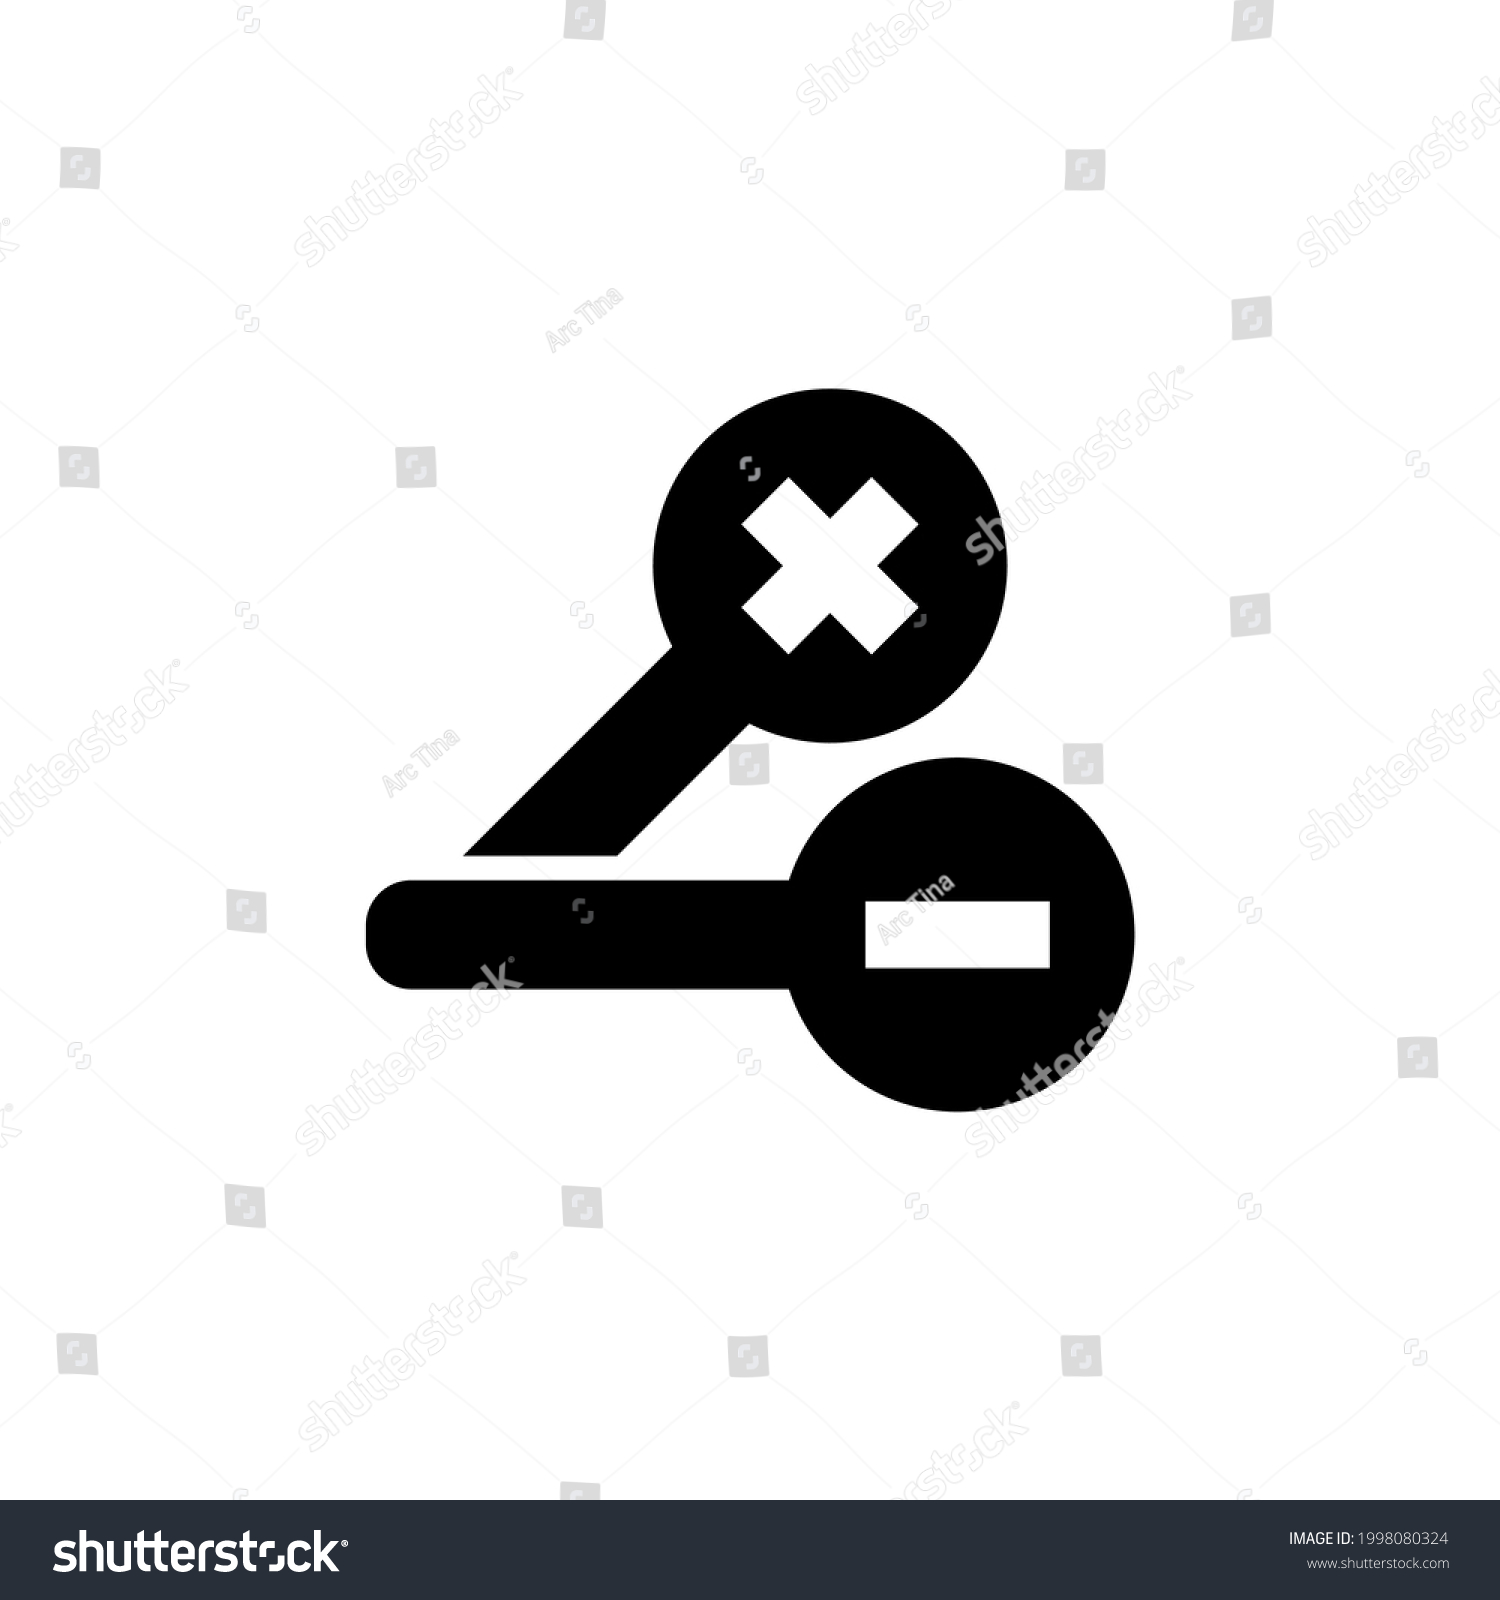 SVG of Ophthalmology Test, Dioptre Eyesight. Flat Vector Icon illustration. Simple black symbol on white background. Ophthalmology Test, Dioptre Eyesight sign design template for web and mobile UI element svg